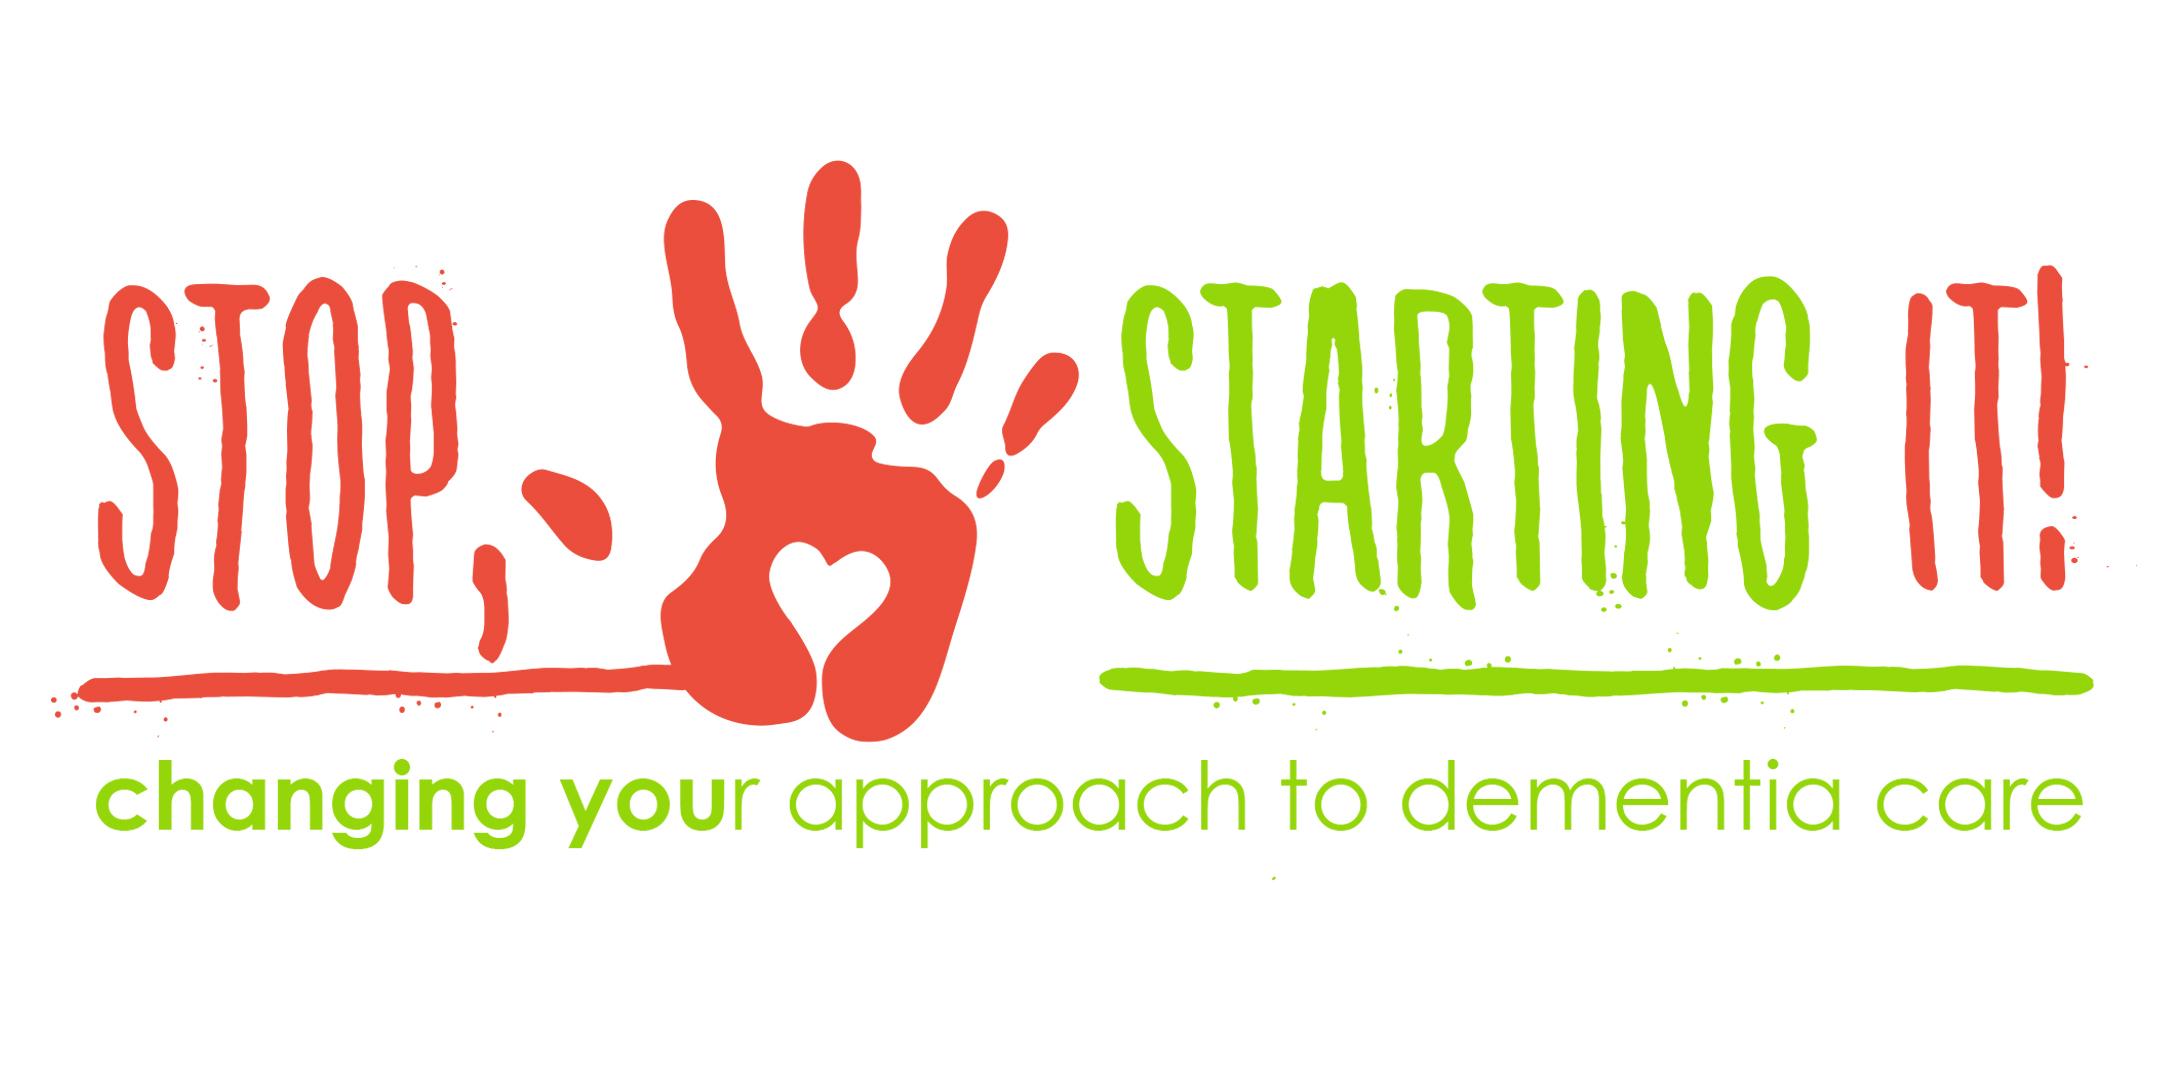 Stop, Starting It! Changing Your Approach to Dementia Care: Eau Claire, WI